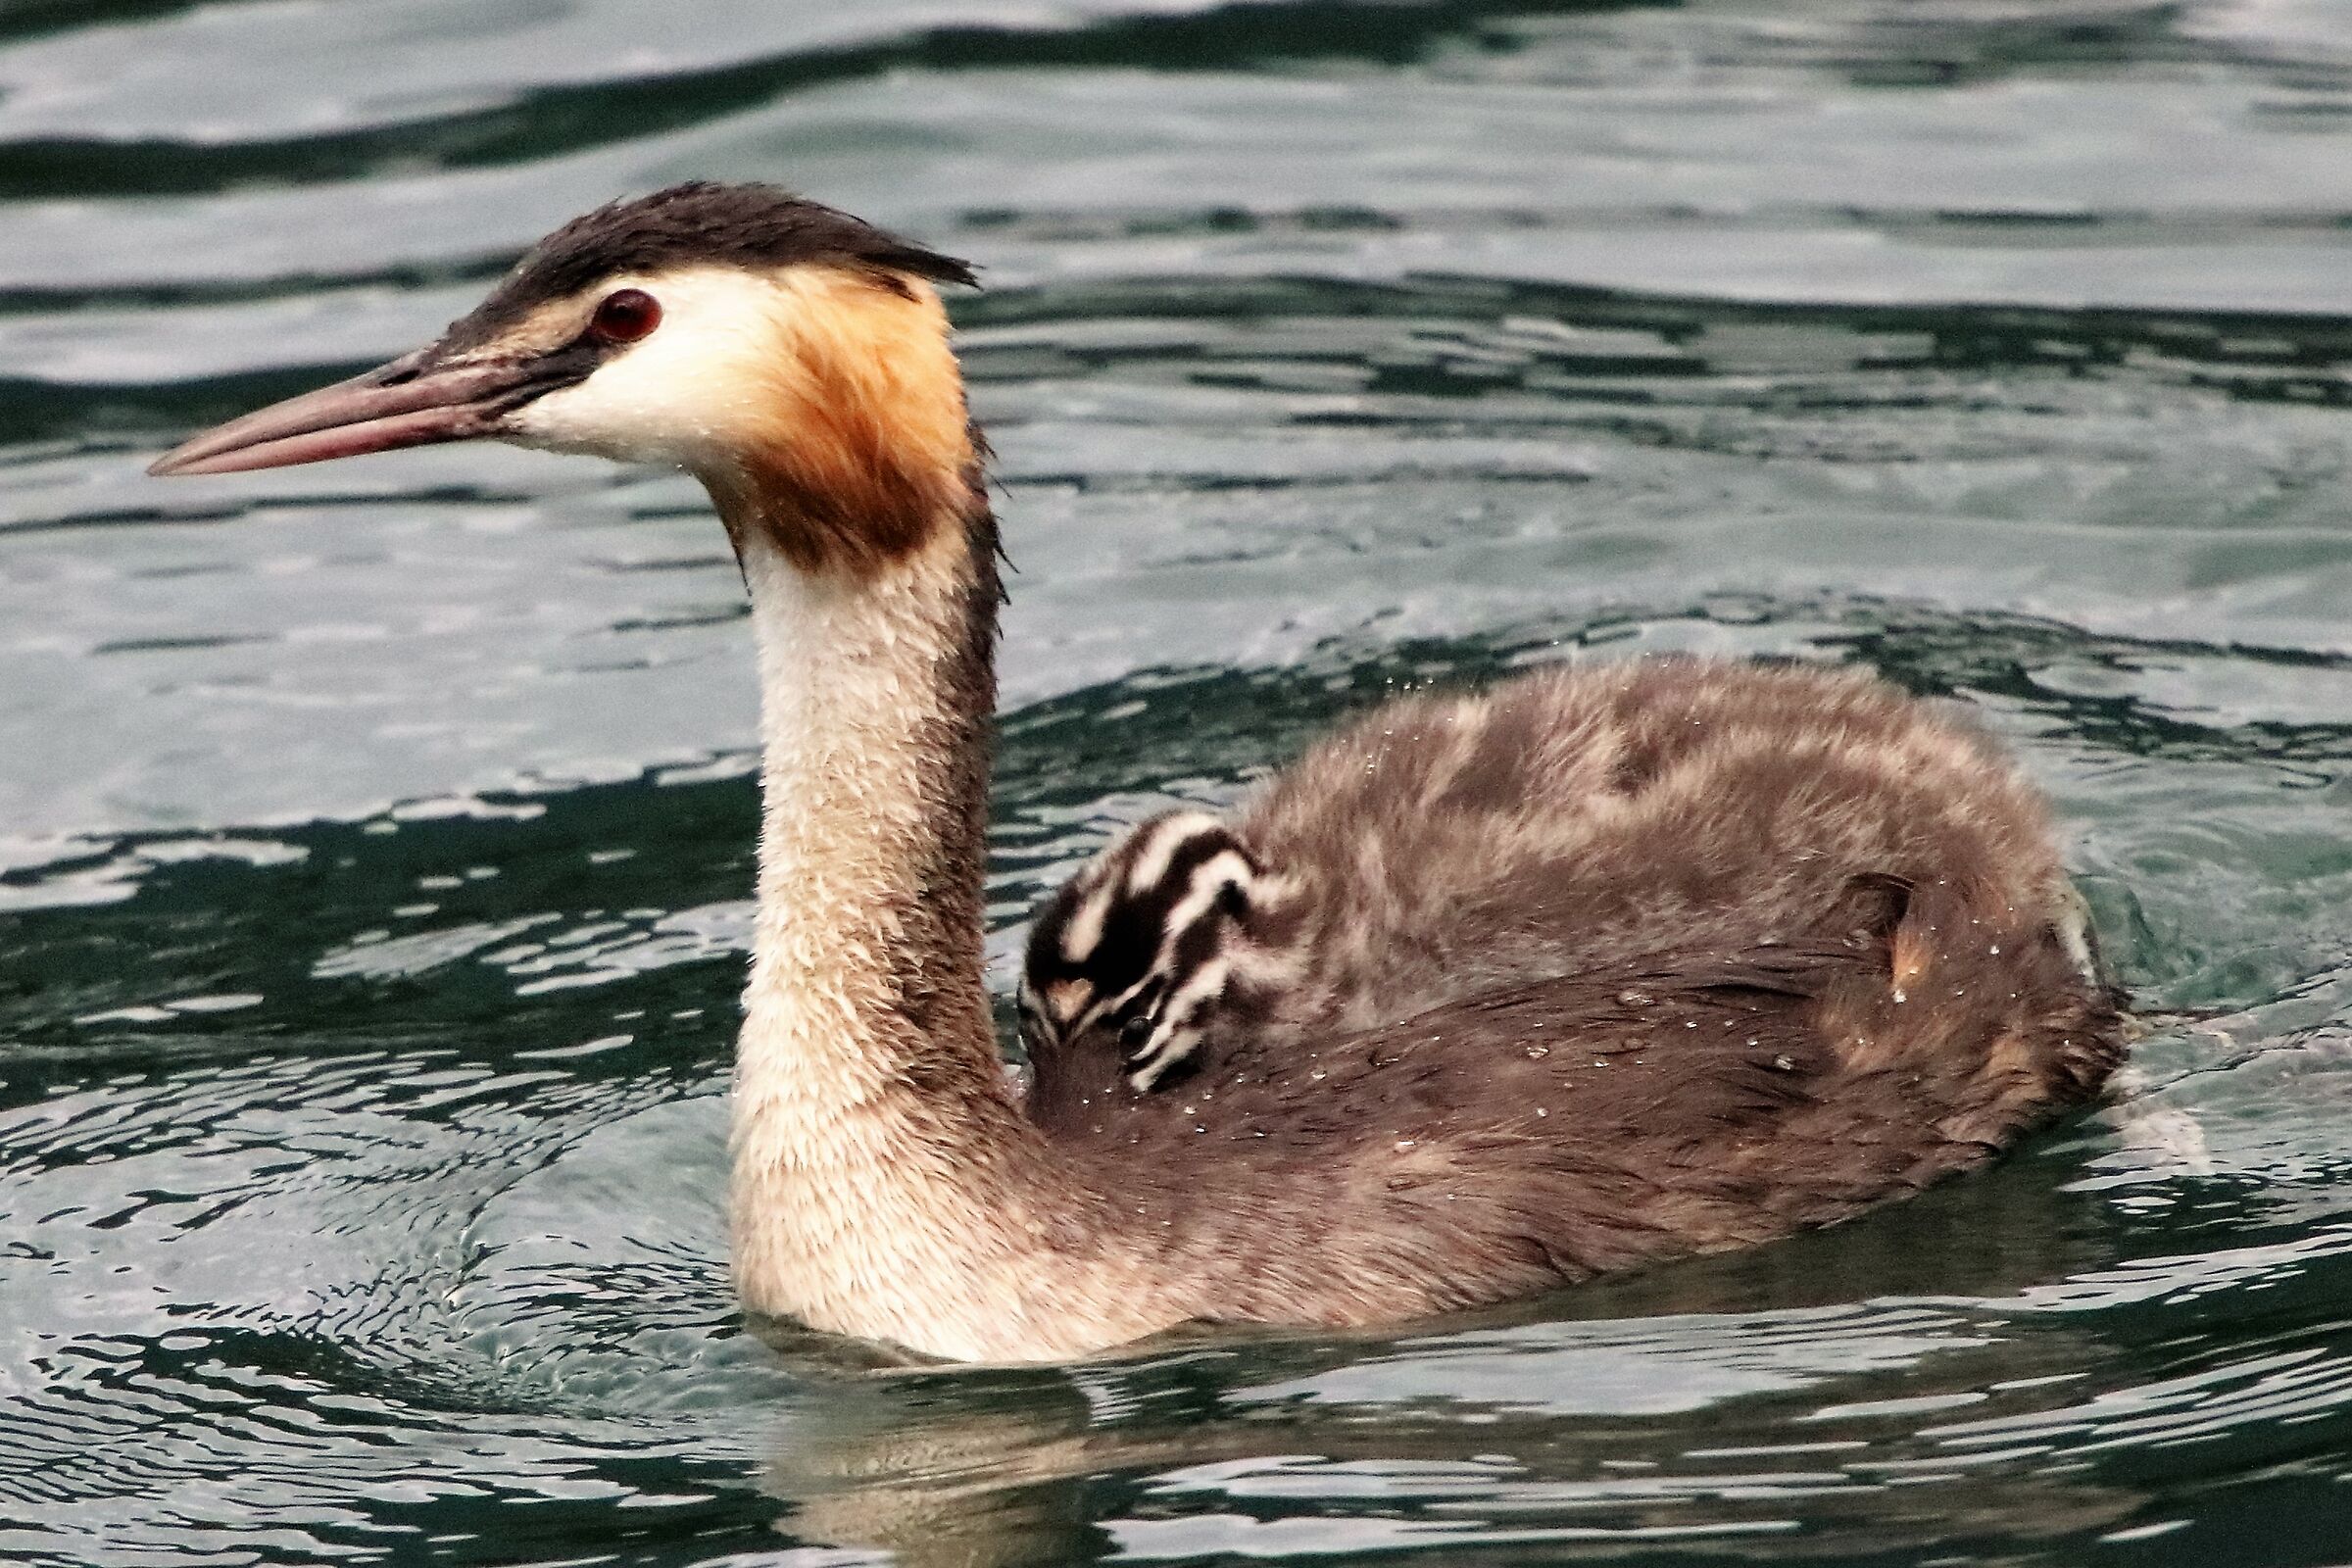 grebe with offspring...